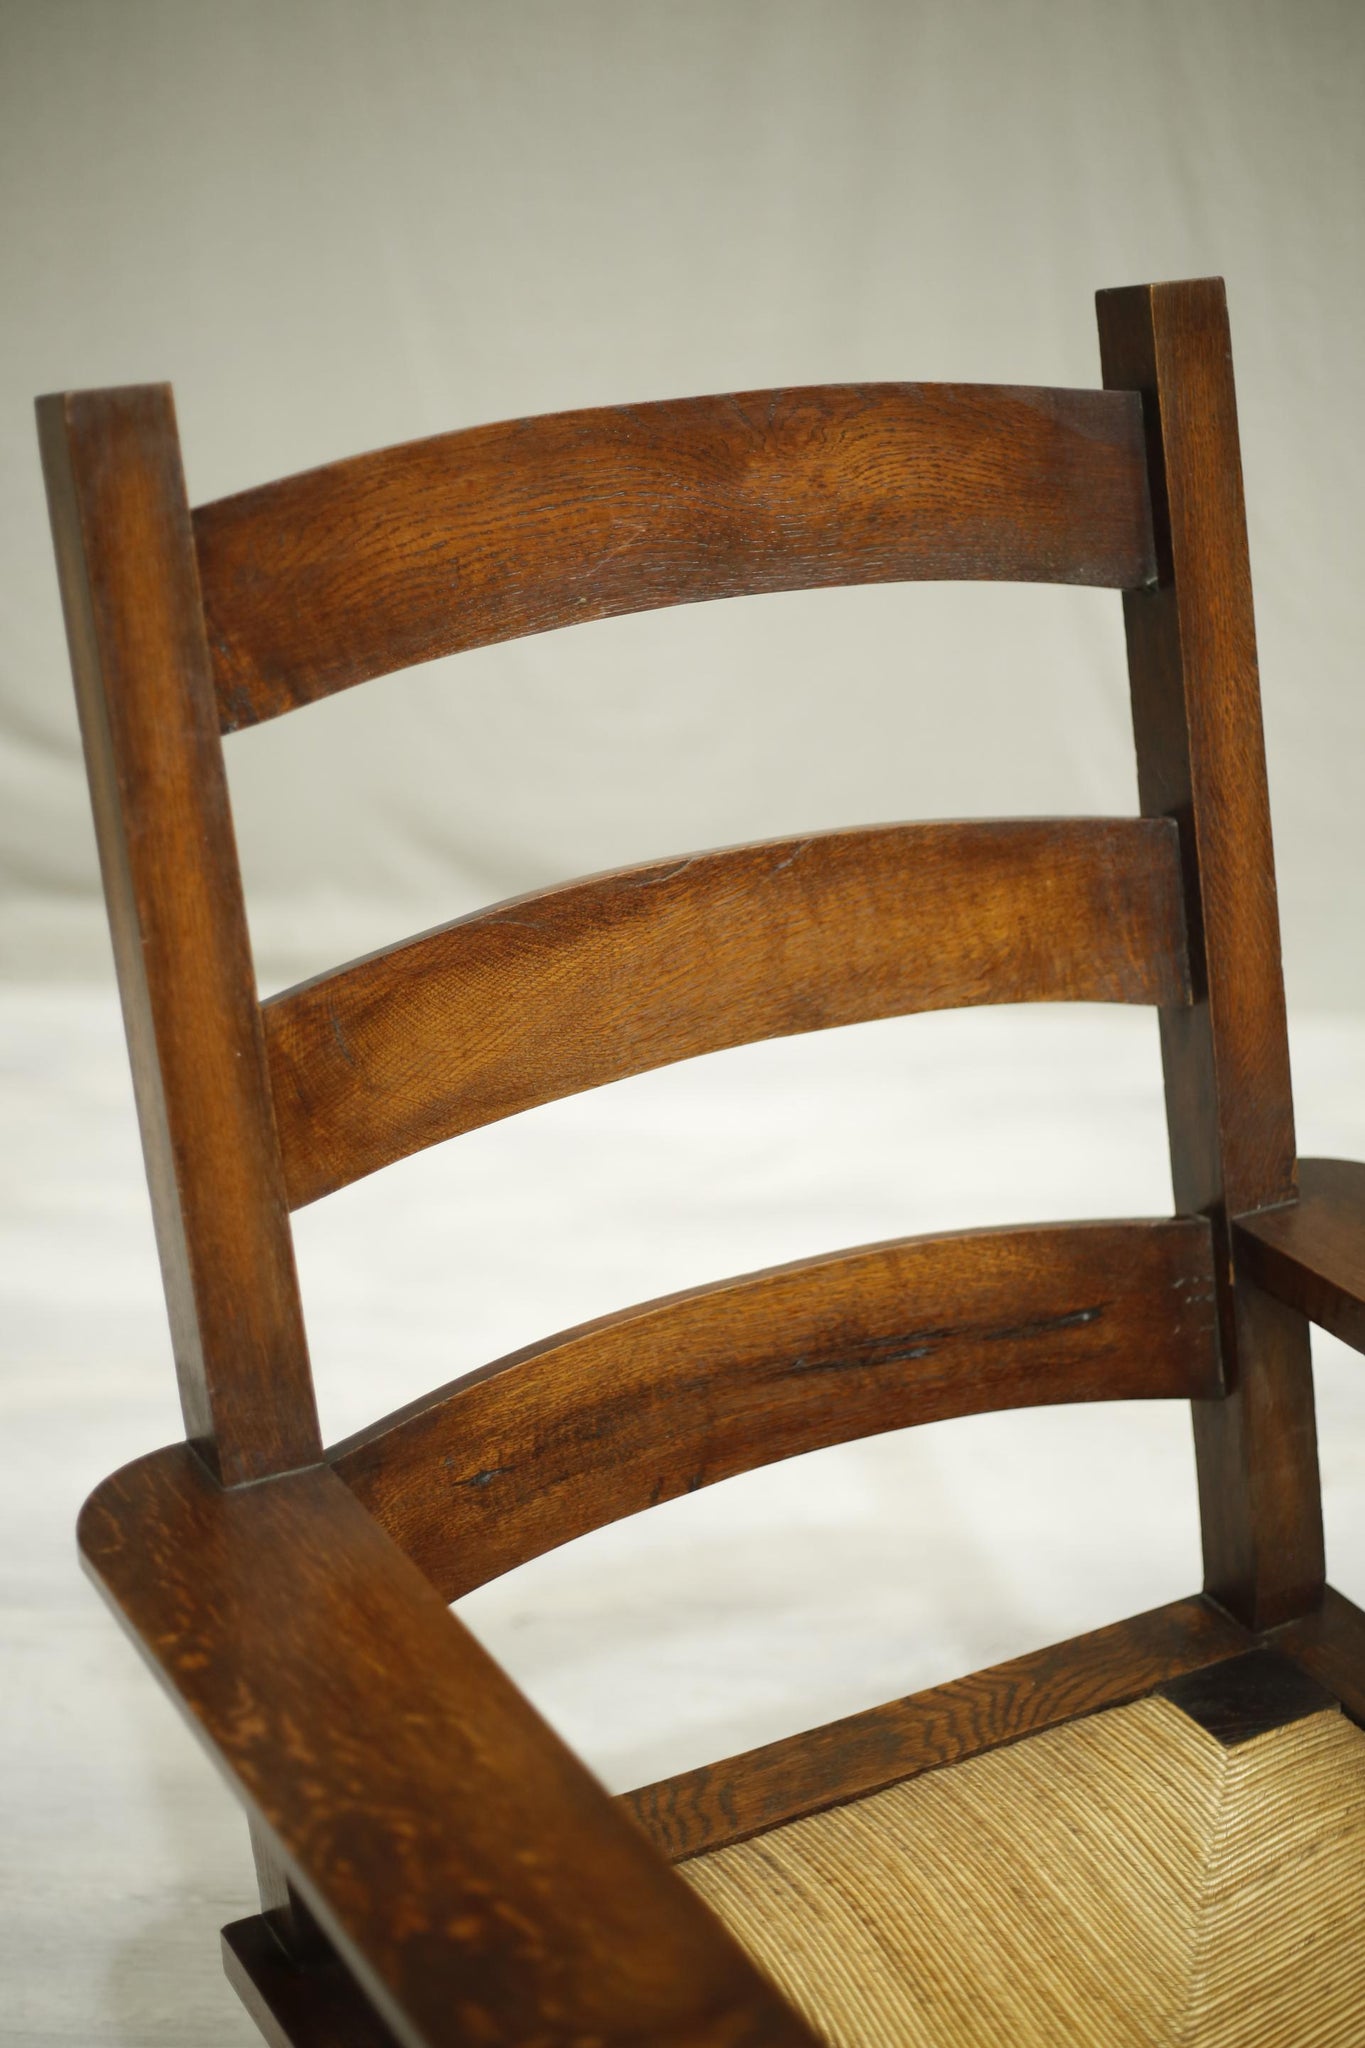 Pair of Japanese Influence oak and rush seated armchairs